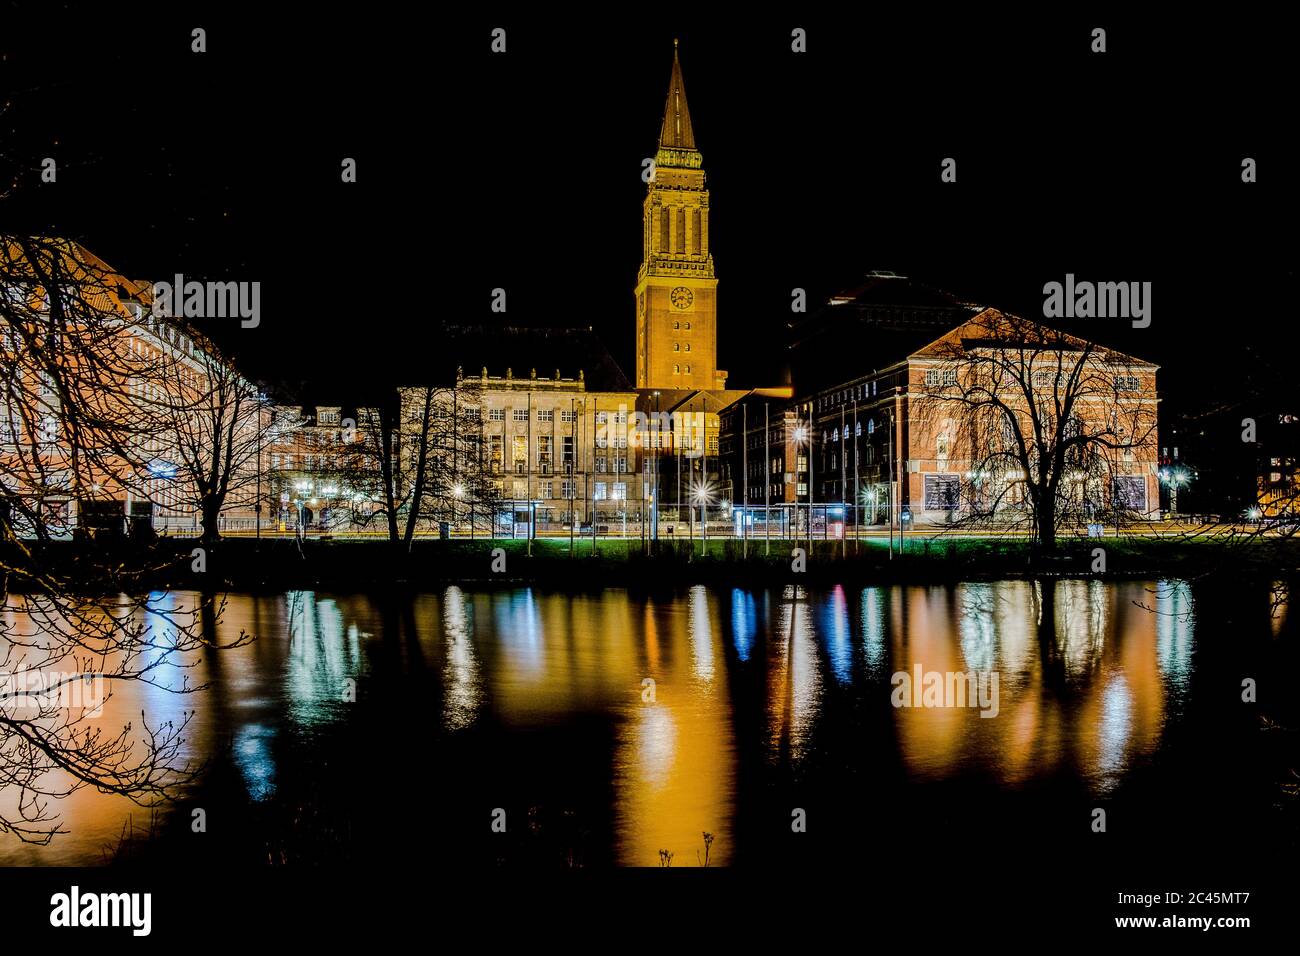 Town hall in the city of Kiel, Germany, during night Stock Photo